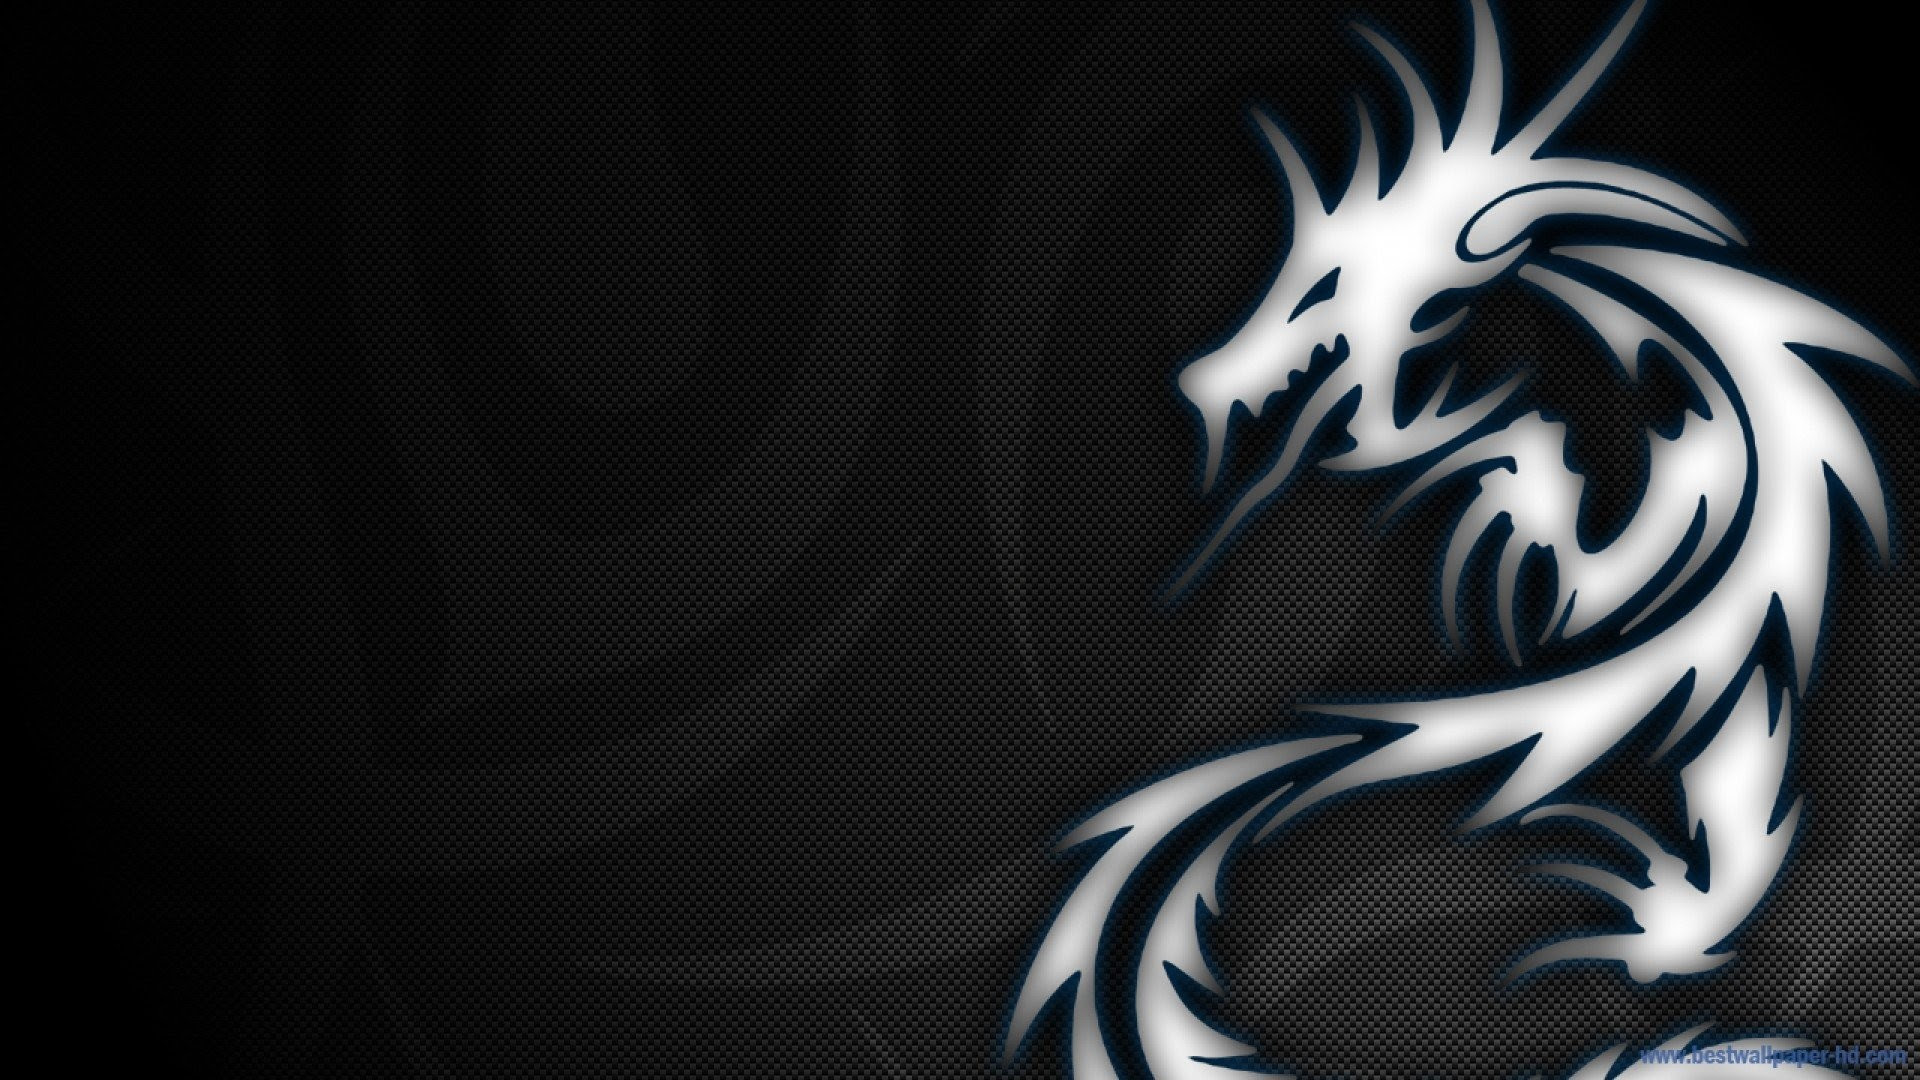 The hackand.apk file which we downloaded earlier is only 10 kb in size. Kali Linux Wallpaper 1920x1080 83 Images